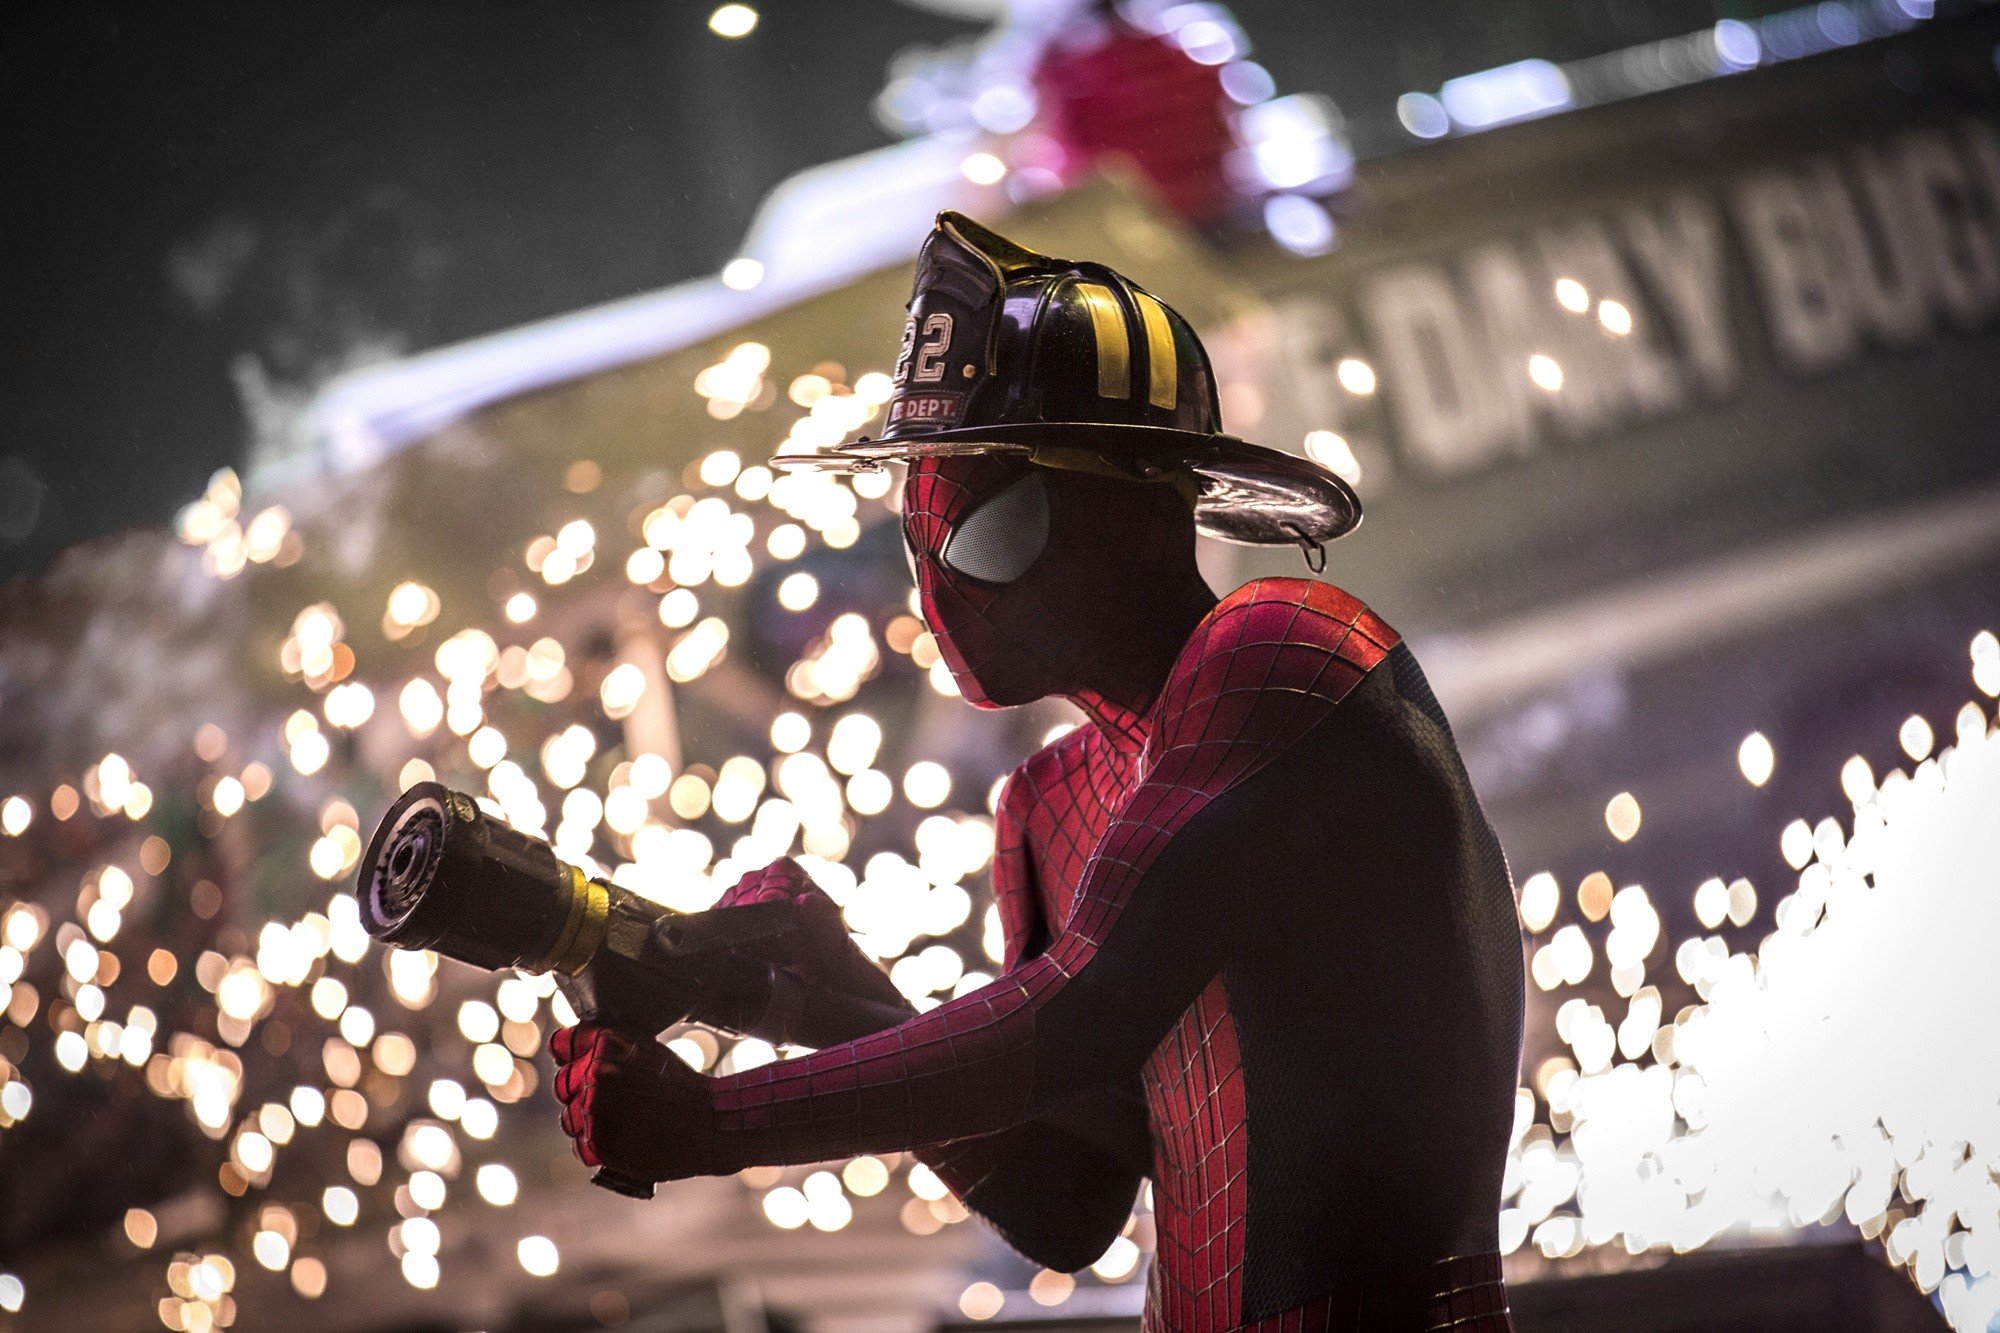 Spider-Man from Columbia Pictures' The Amazing Spider-Man 2 (2014)